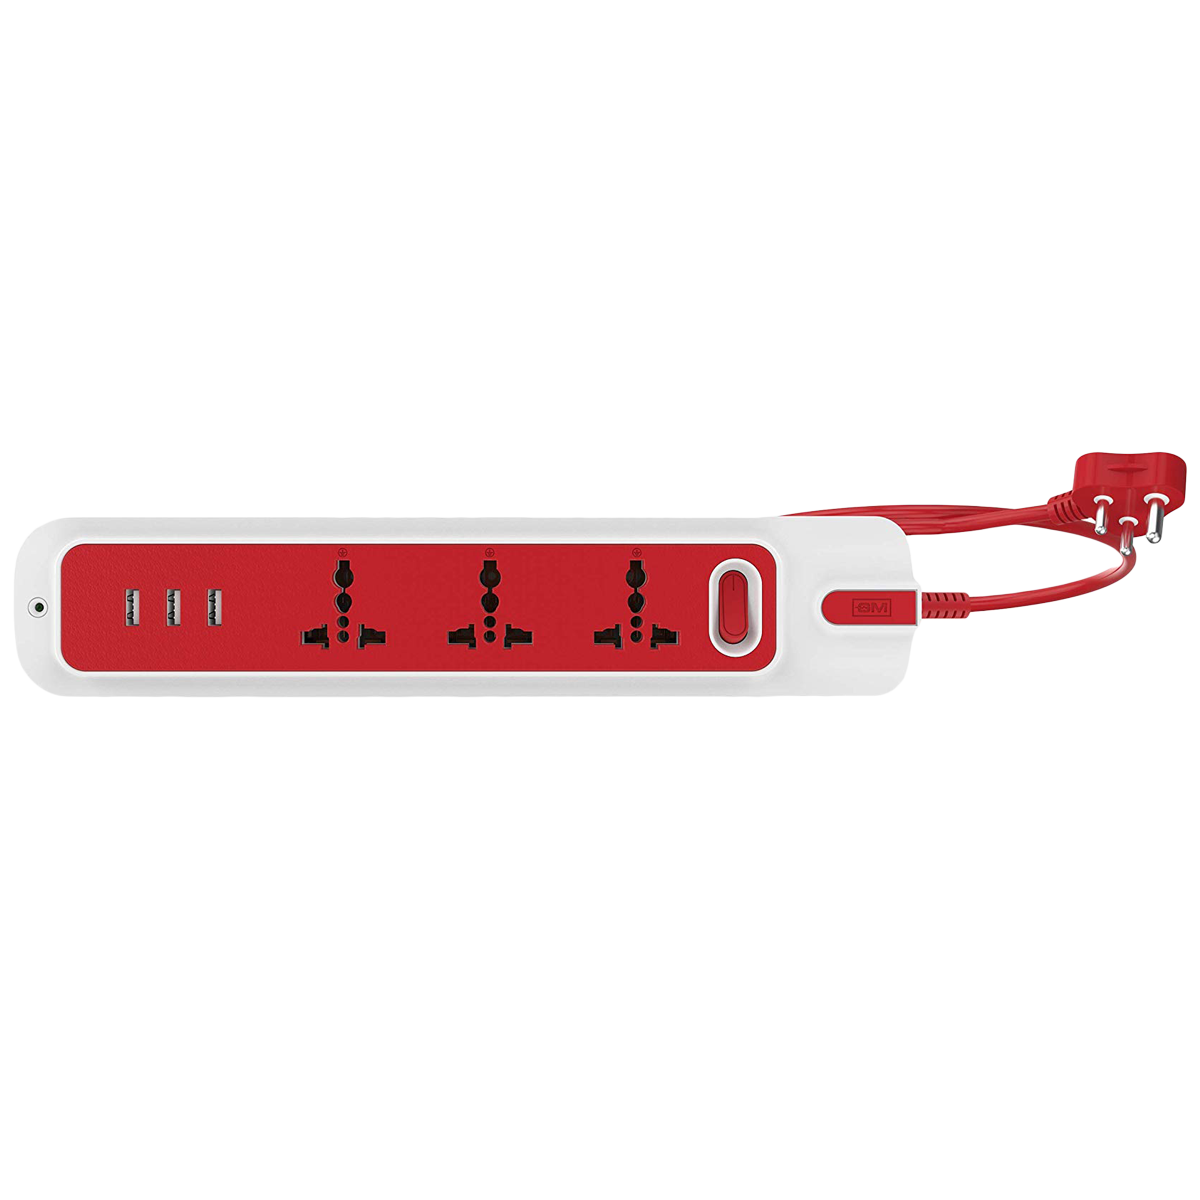 GM Lemoid 10 Amps 3 Sockets Surge Protector (2.1 Meters, 3260, White/Red)_1